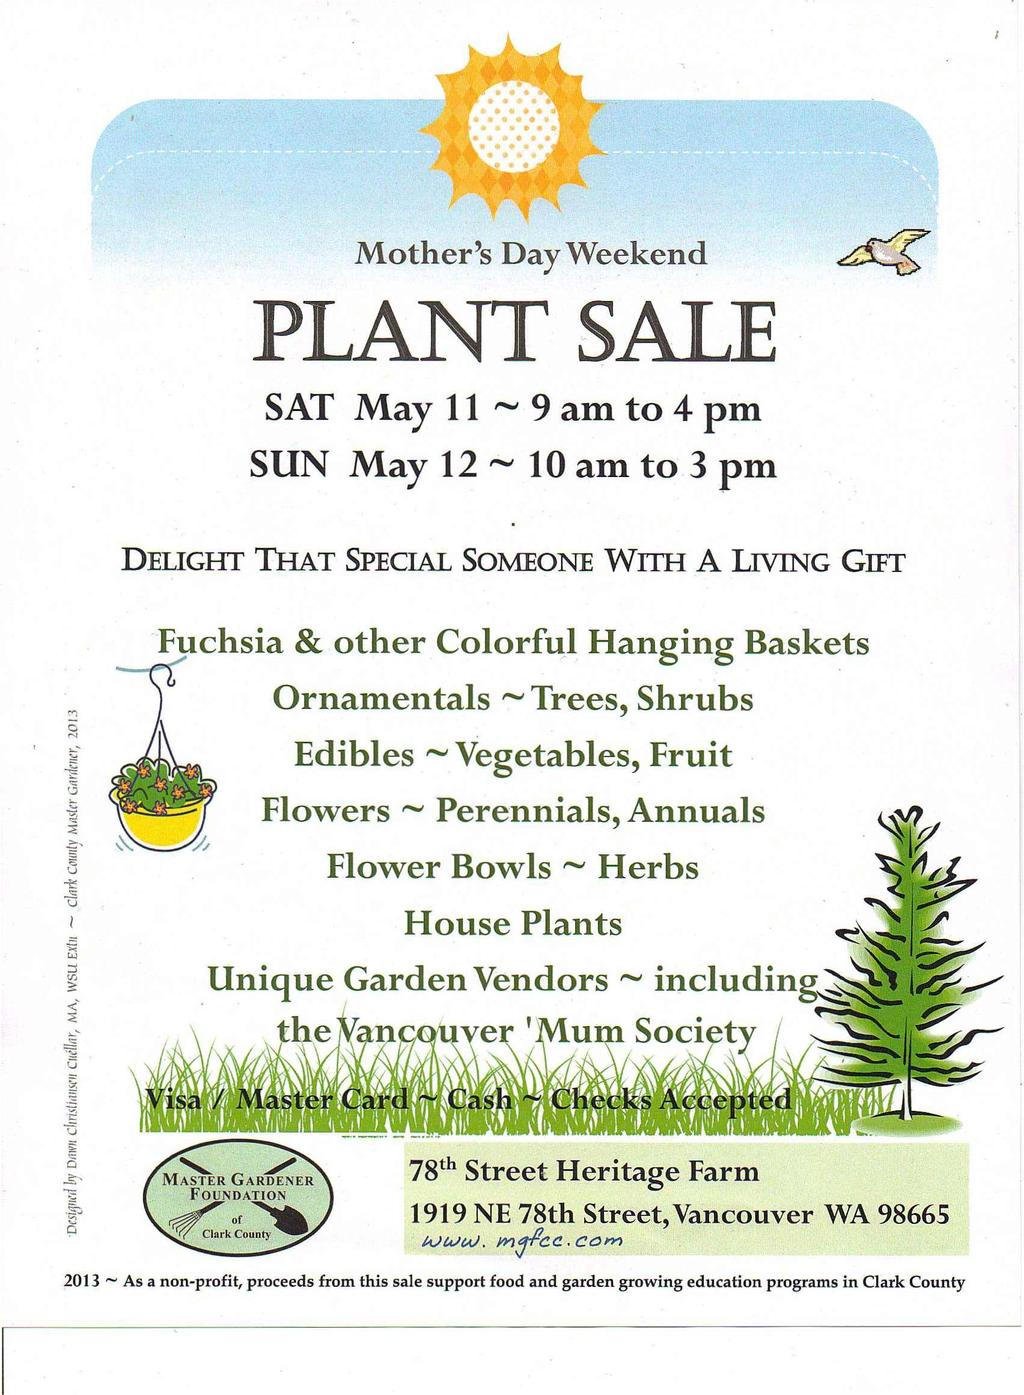 Mother's Day Weekend -. PLANT SALE SAT May 11 '" 9 am to 4 pm SUN May 12 '" 10 am to.3 pm DELIGHT THAT SPECIAL SO:MEONE WITH A LIVING GIFT ("!